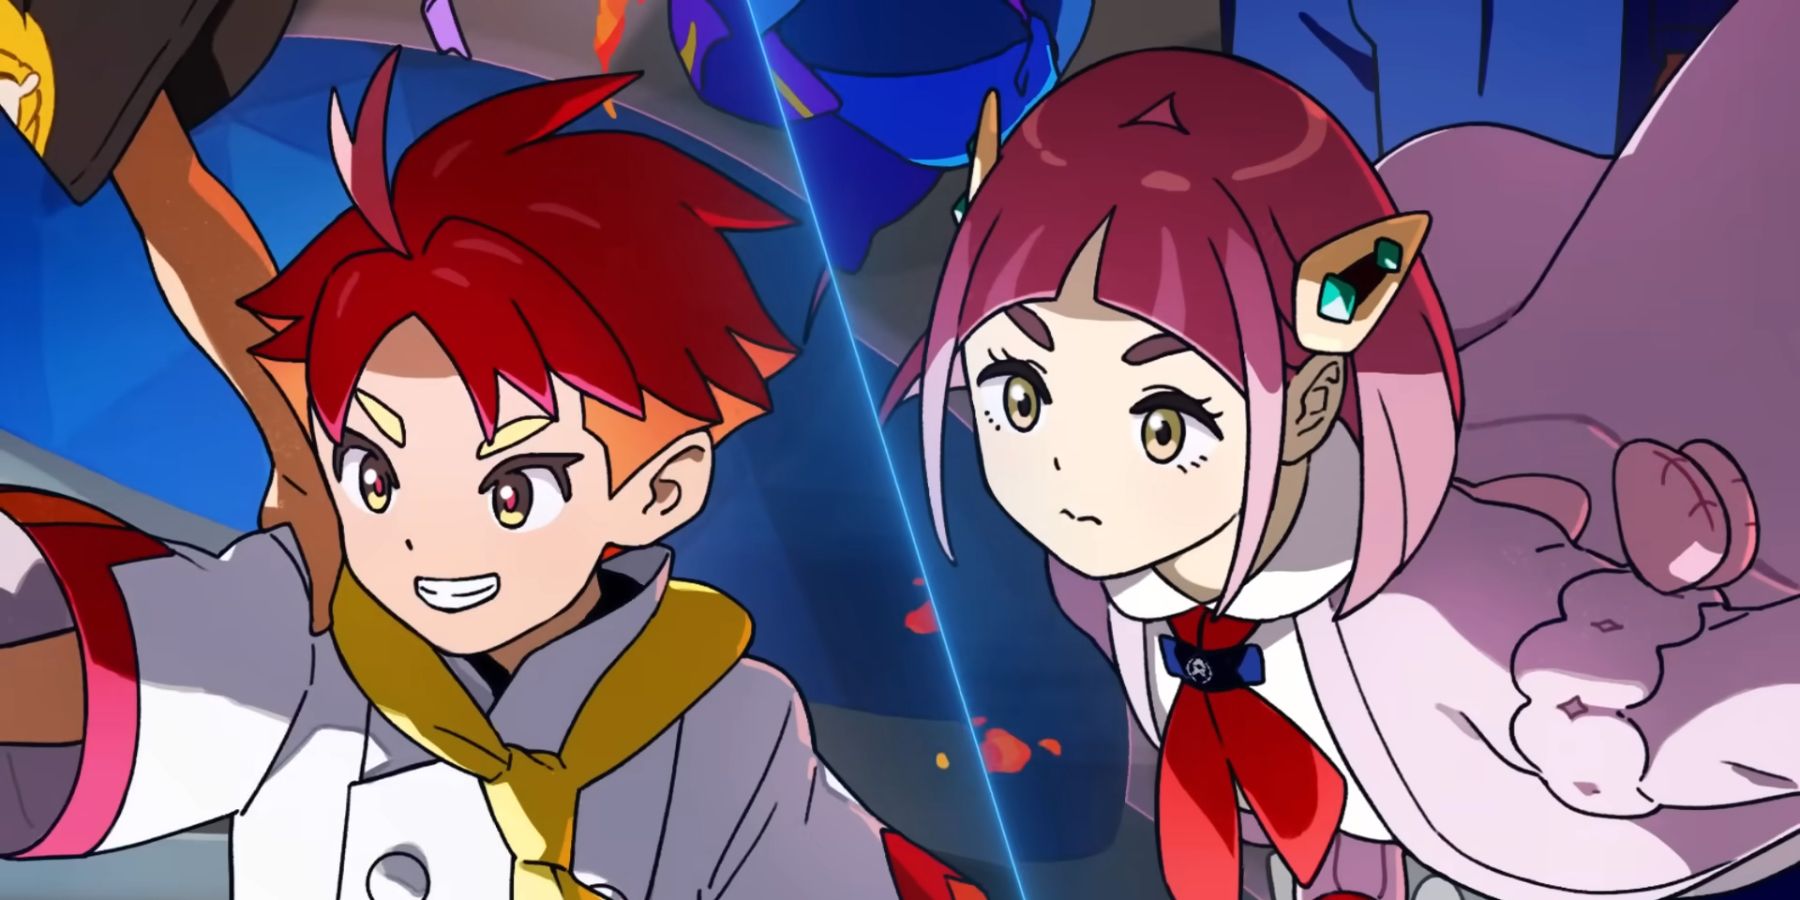 Two new characters teased for Pokémon Scarlet and Violet's upcoming DLC, The Hidden Treasure of Area Zero. Both have red-colored hair and appear to be from the DLC's Part 2: The Indigo Disk.